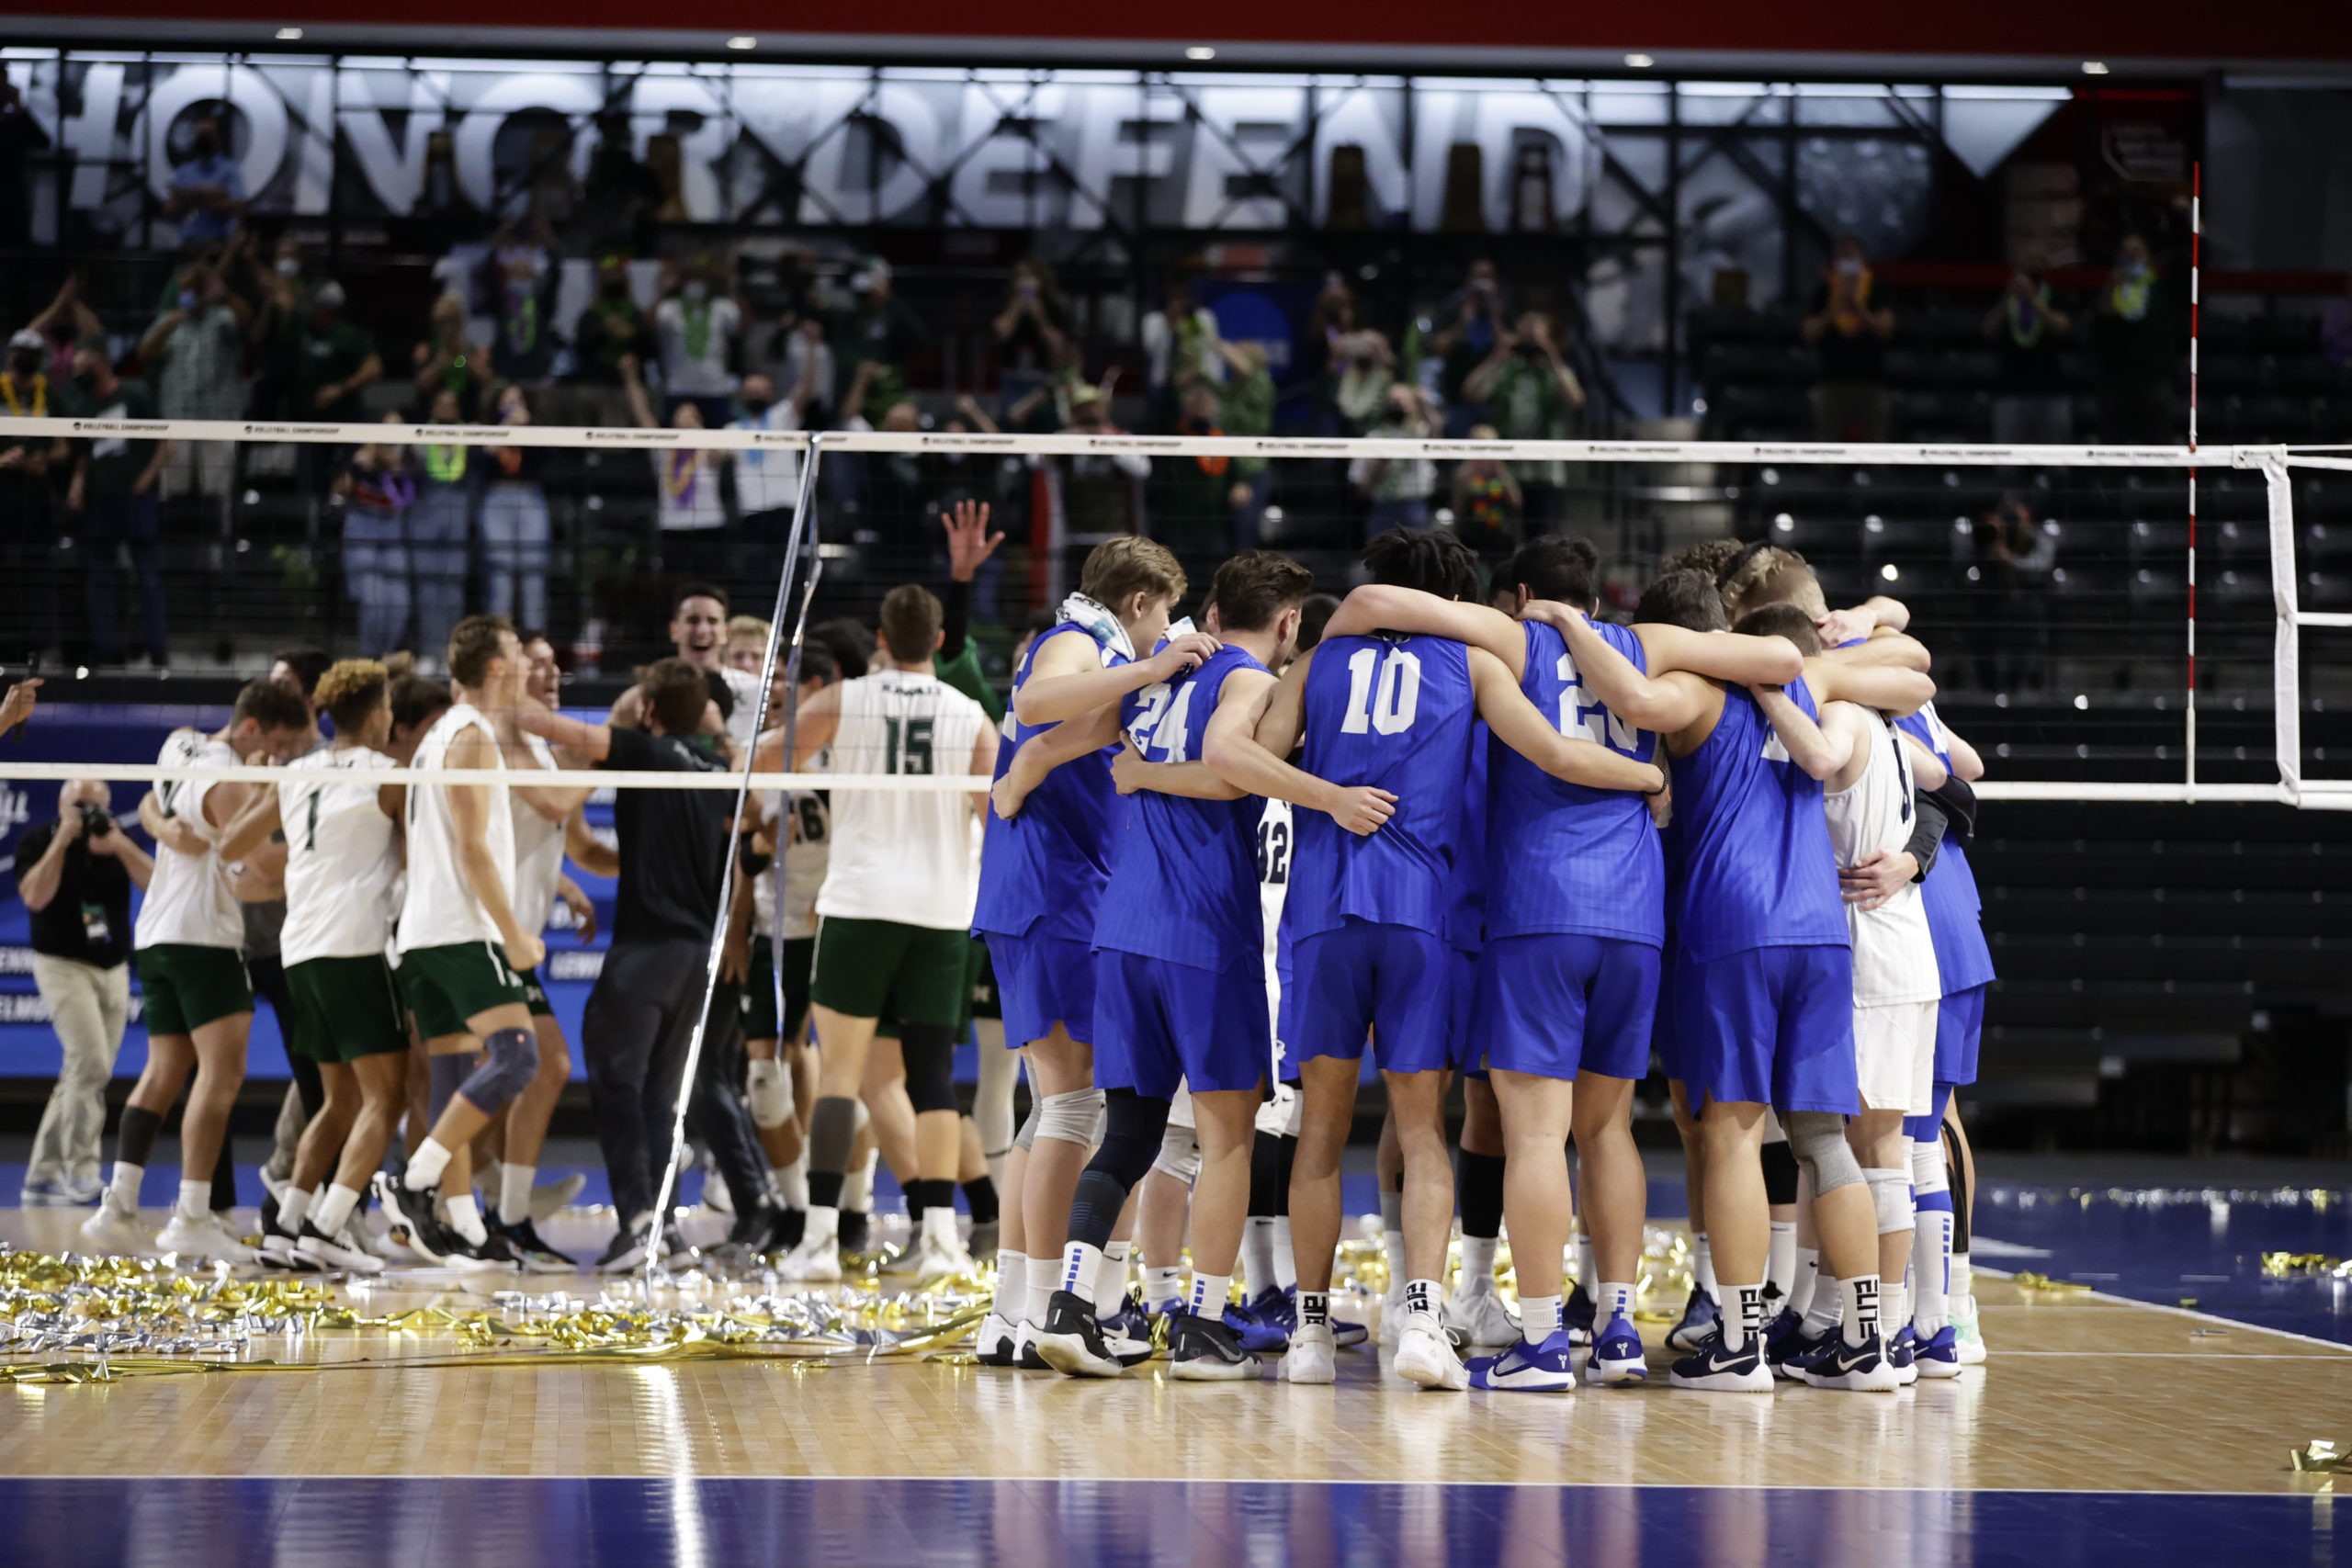 Expectations for BYU men's volleyball season ride high despite roster